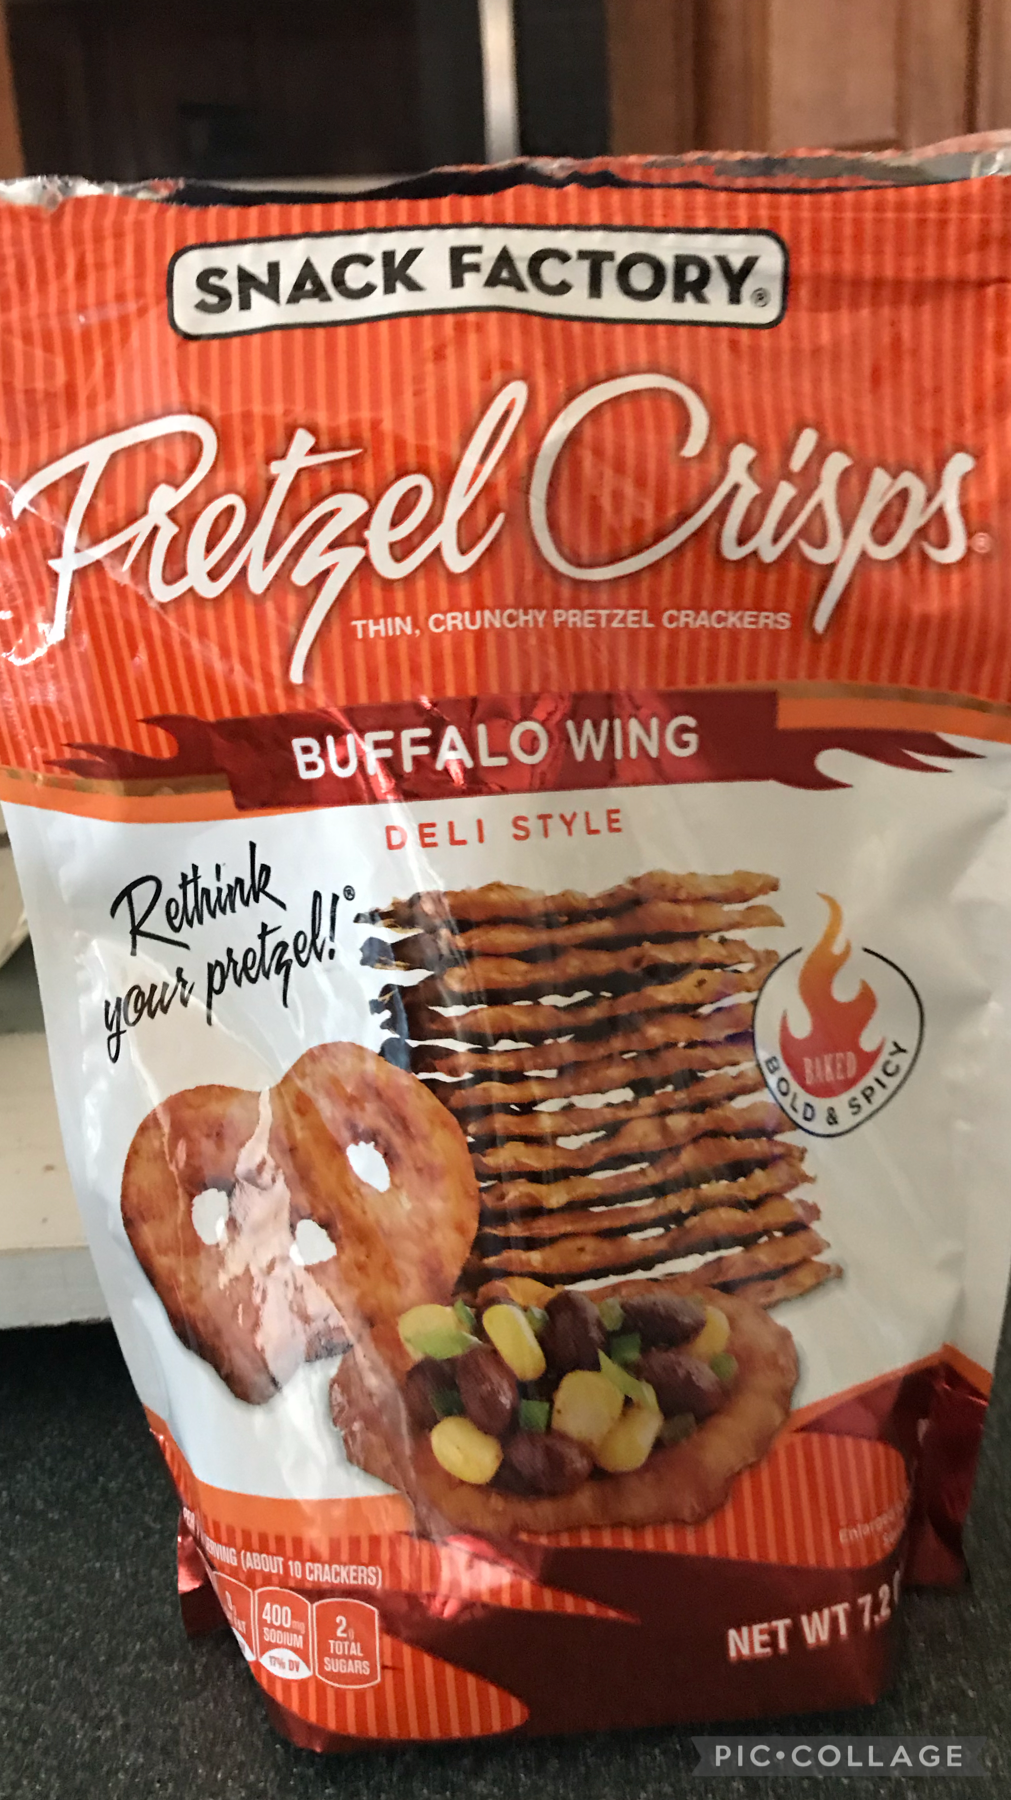 You need to try these pretzels!!!!😃🧐